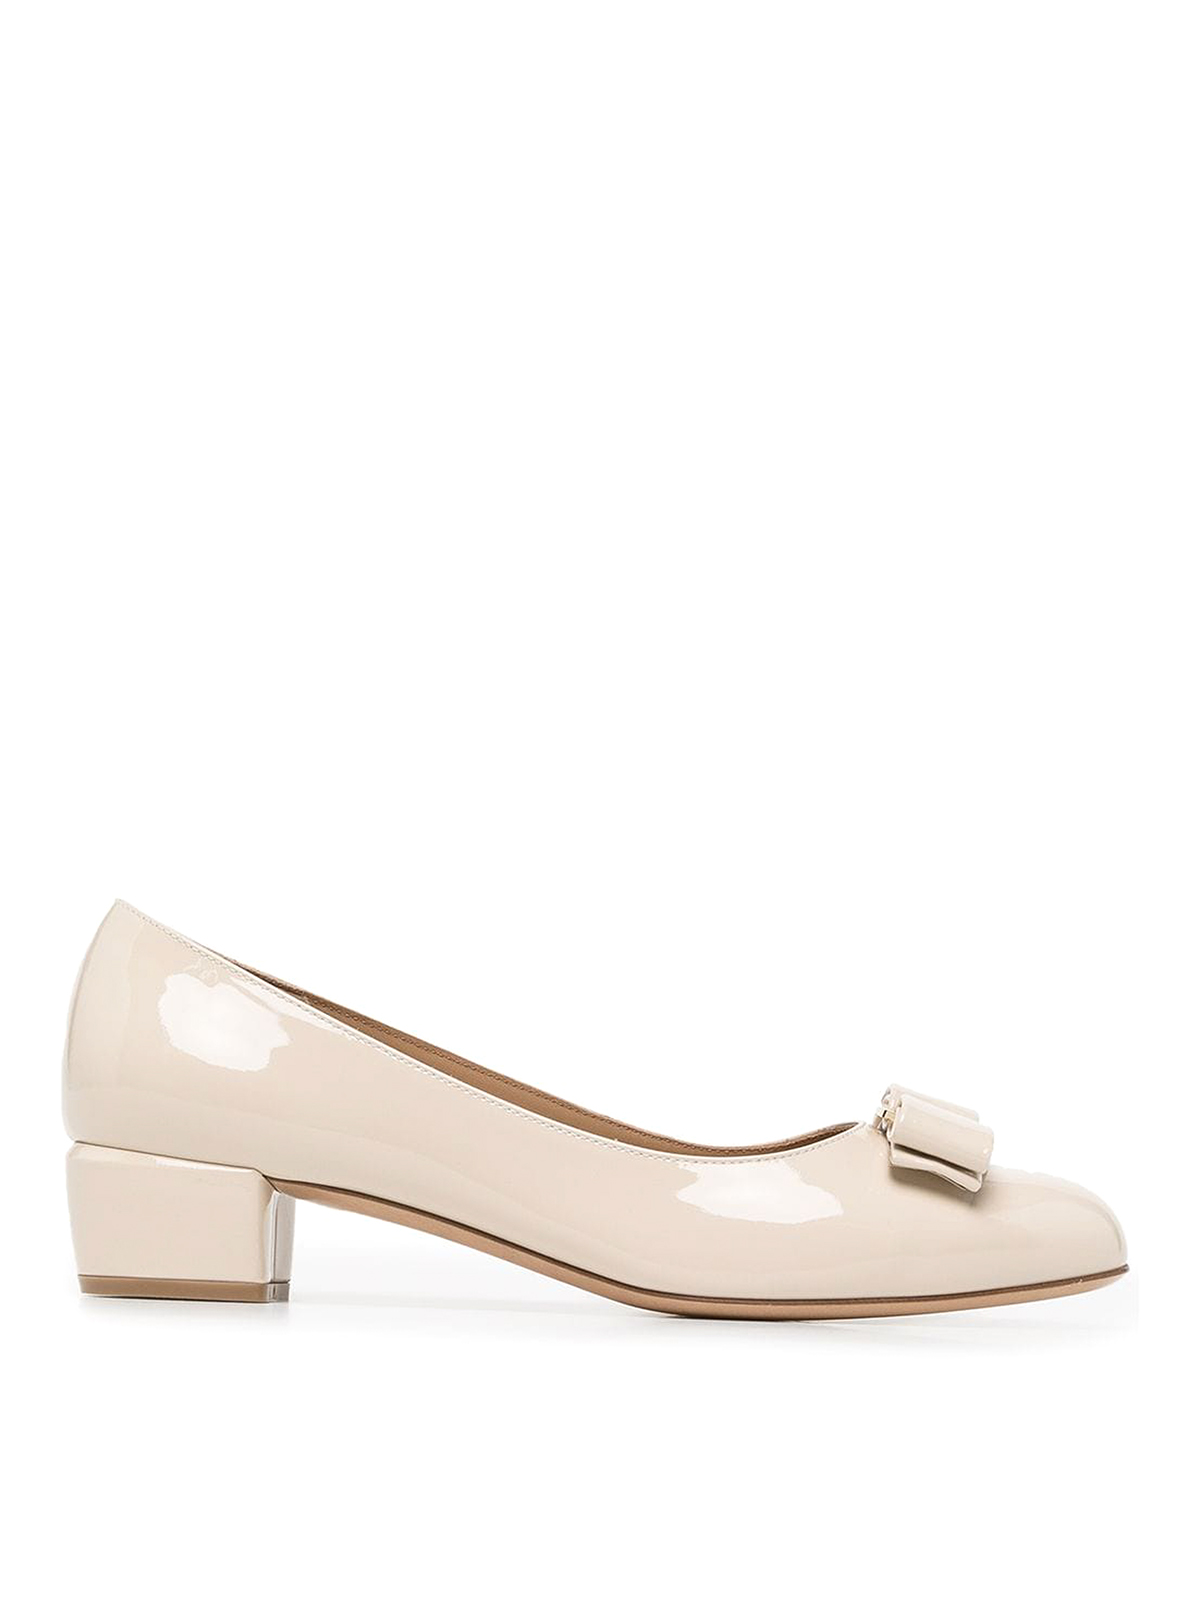 Ferragamo Patent Leather Flats With Bow Detail In Blanco